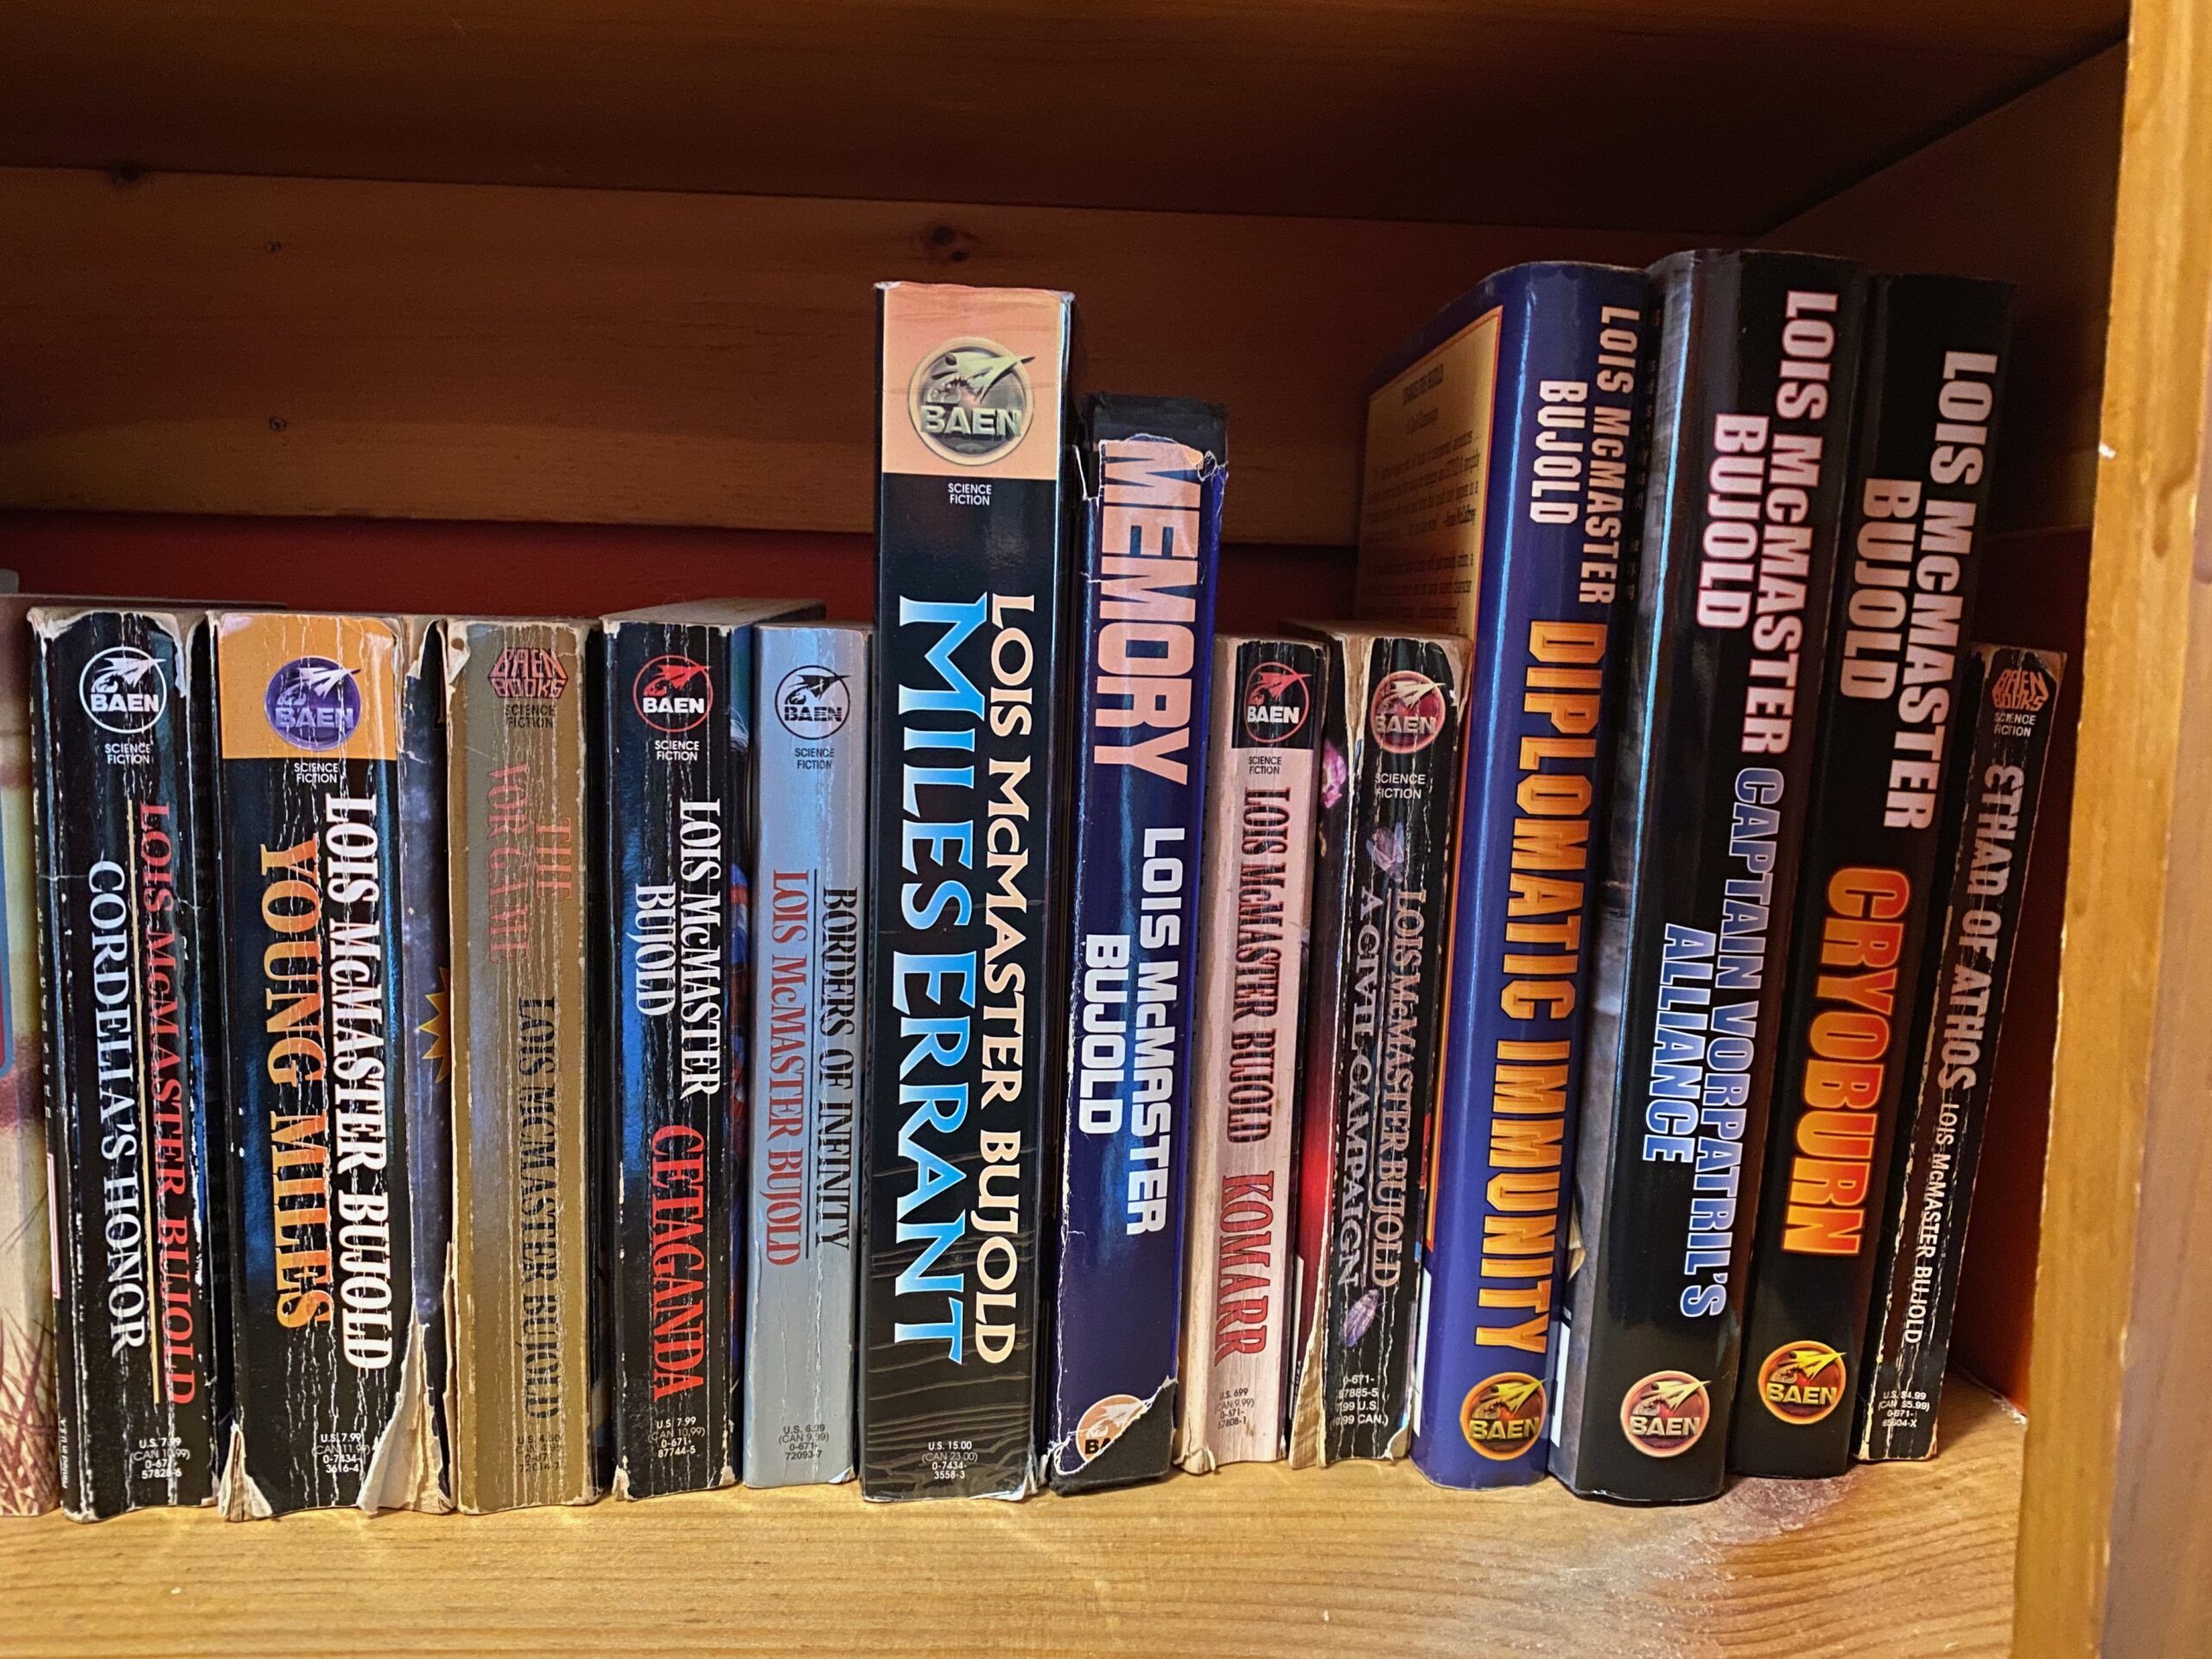 The books in the Vorkosigan Saga lined up on a bookshelf. They are mostly well-worn mass market paperbacks. (Photo taken by me)